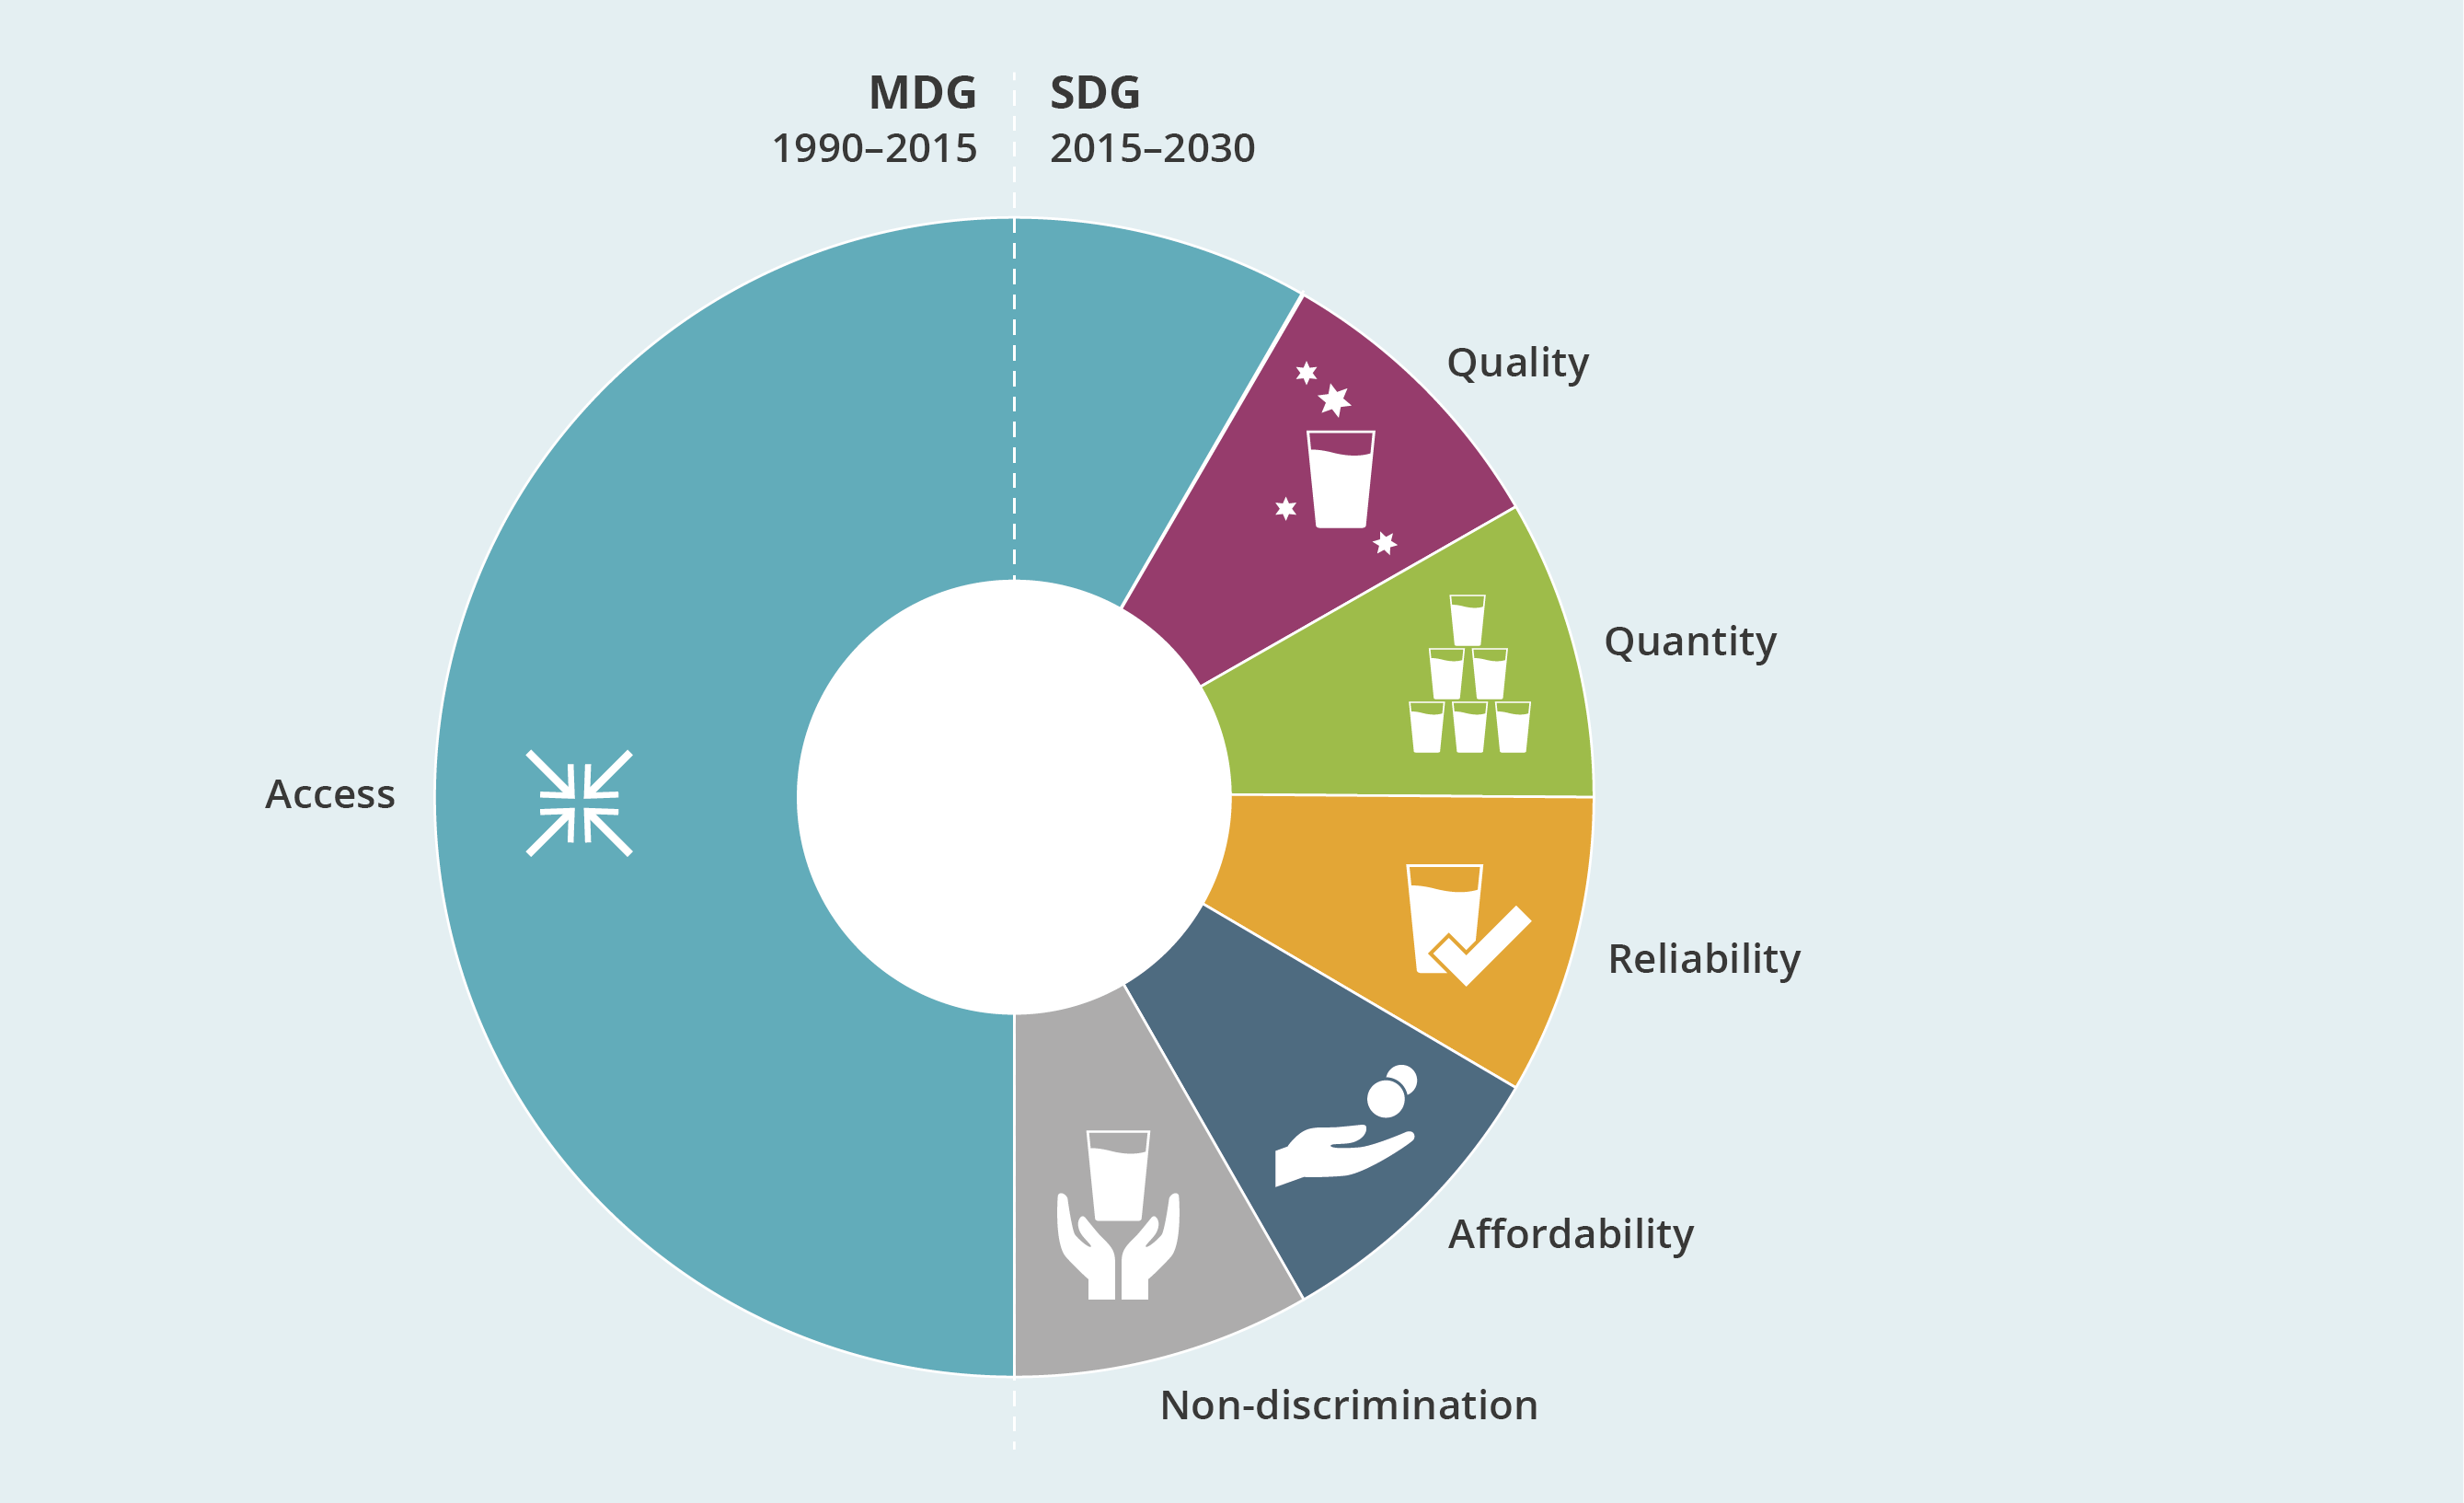 Moving from Millennium Development Goal (MDG) Target 7c (focusing on Access only) to Sustainable Development Goal (SDG) Target 6.1. (focusing on Access, Quality, Quantity, Reliability, Affordability, And Non-discrimination)